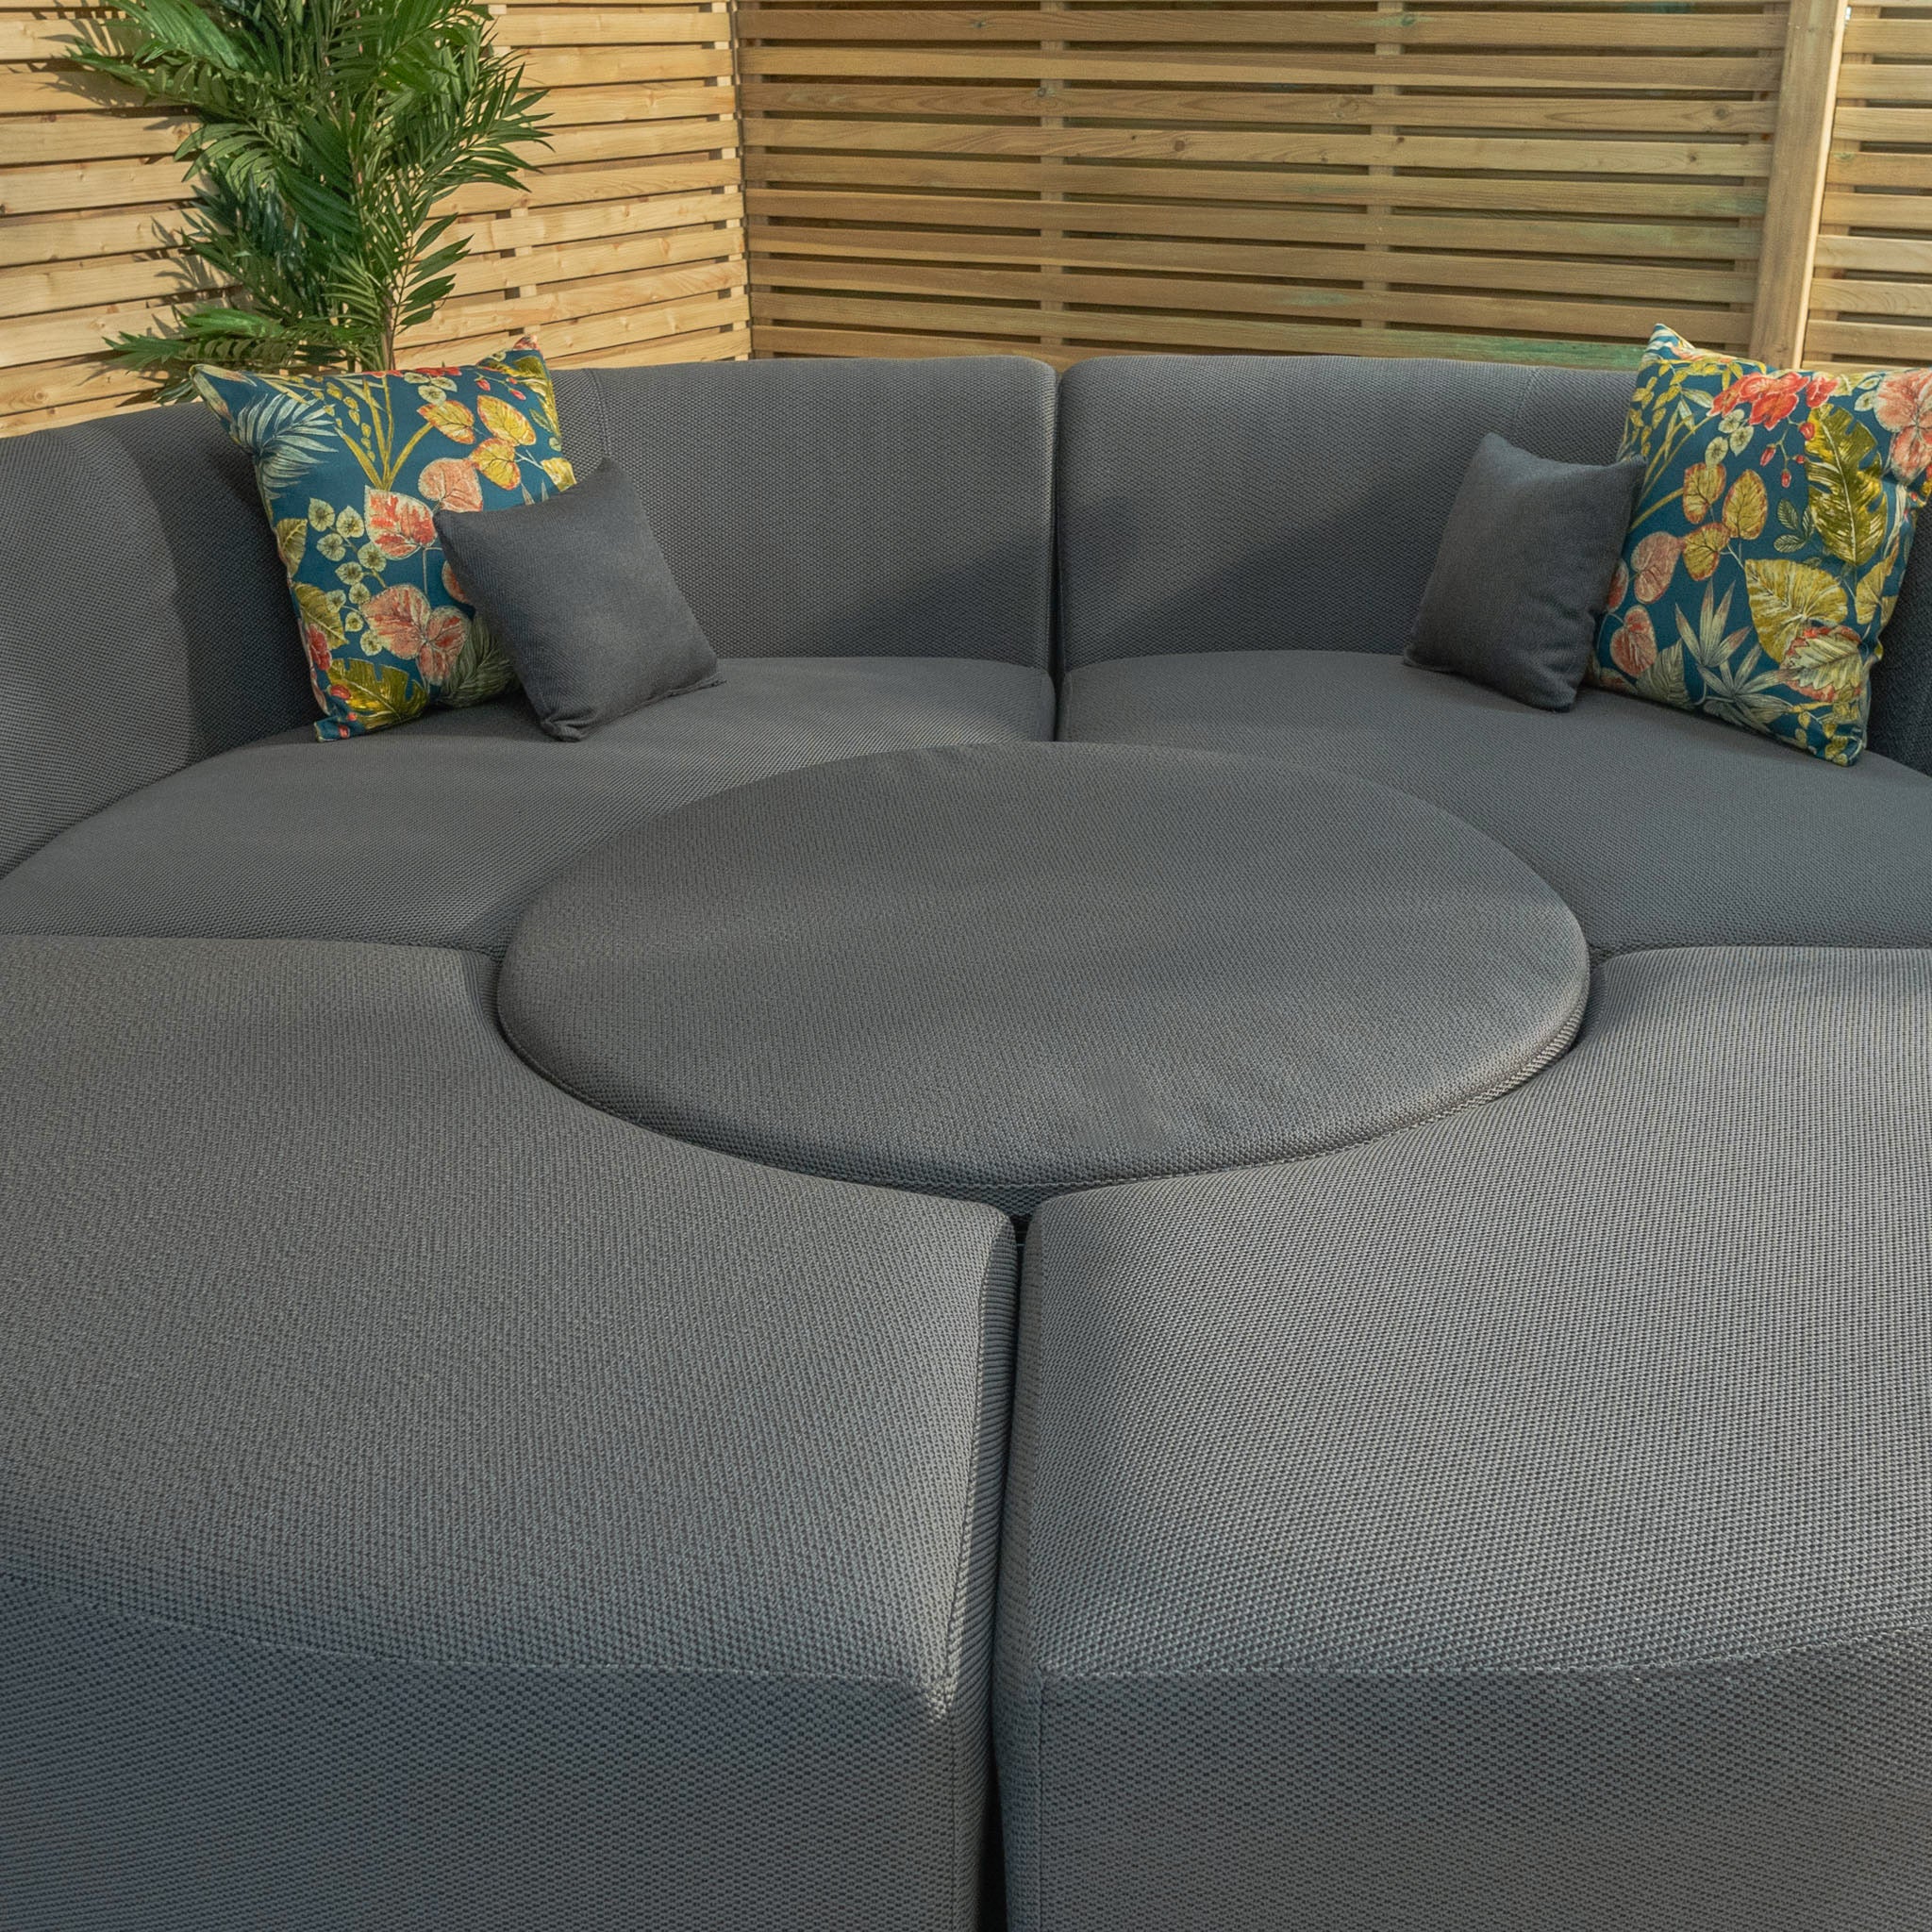 Luna Outdoor Fabric Lifestyle Suite with 2 Sofas and 2 Benches in Grey